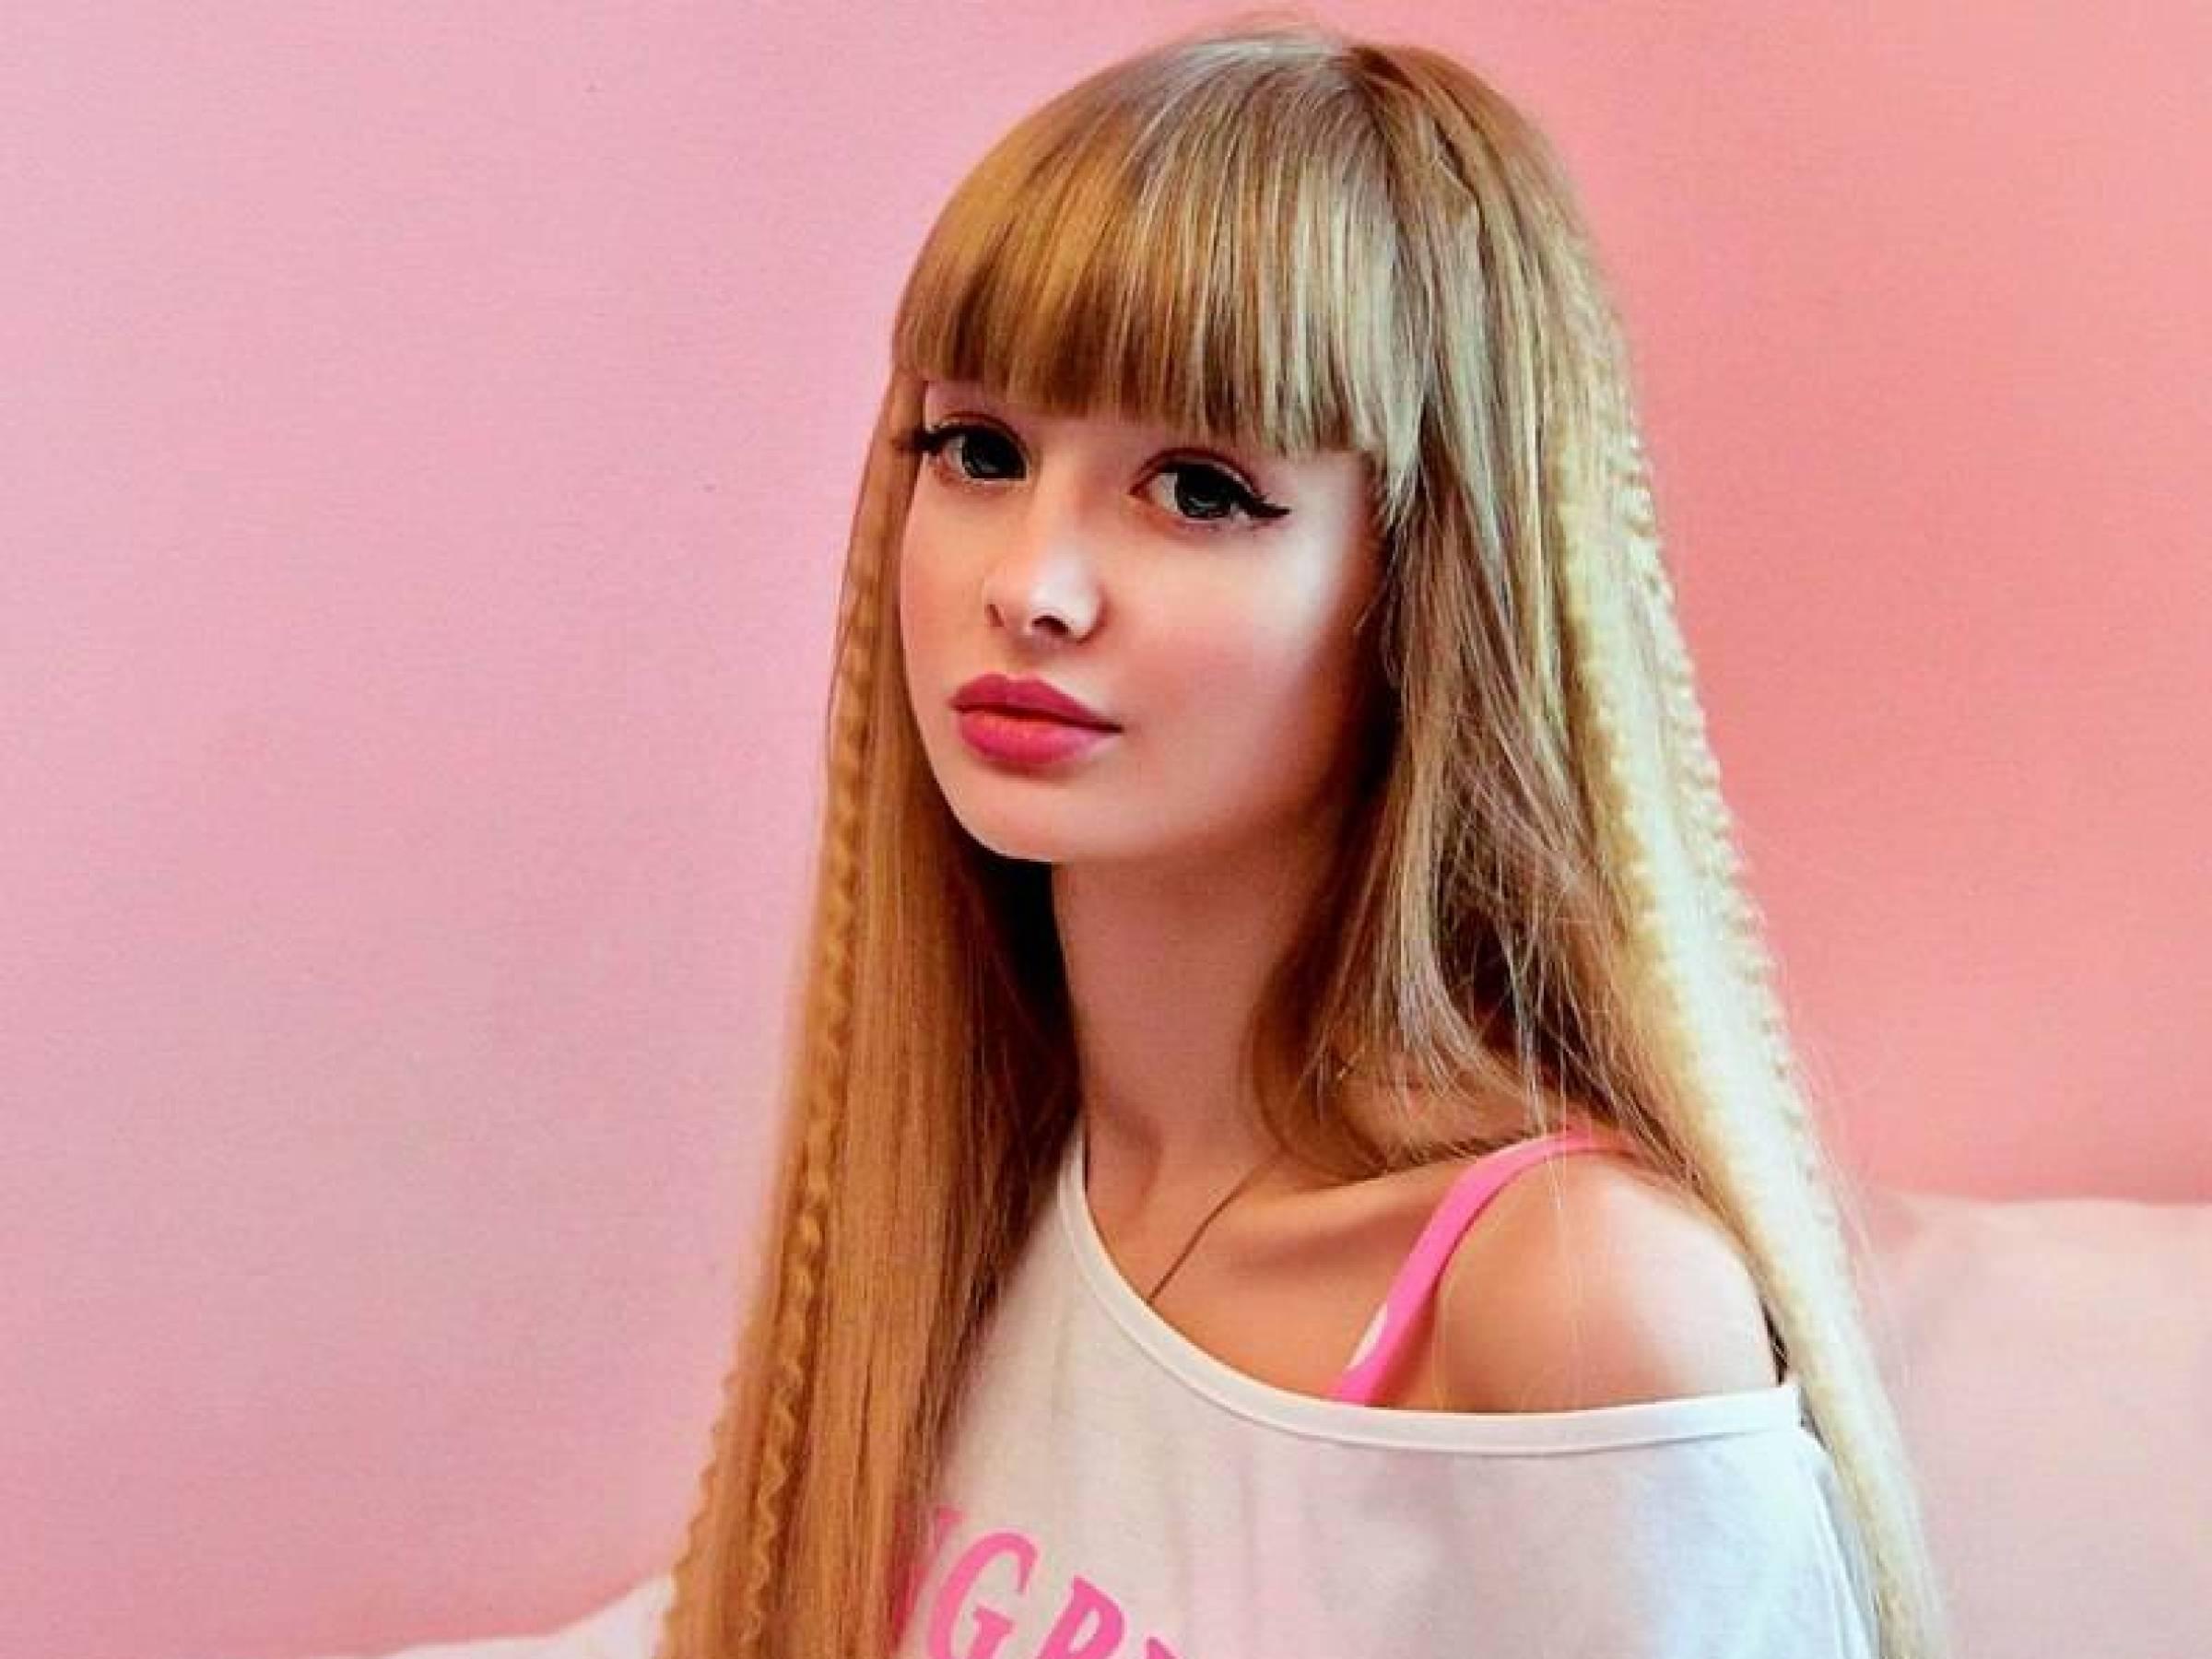 Freaky Meet The Russian Human Barbie Raised As A Living Doll 